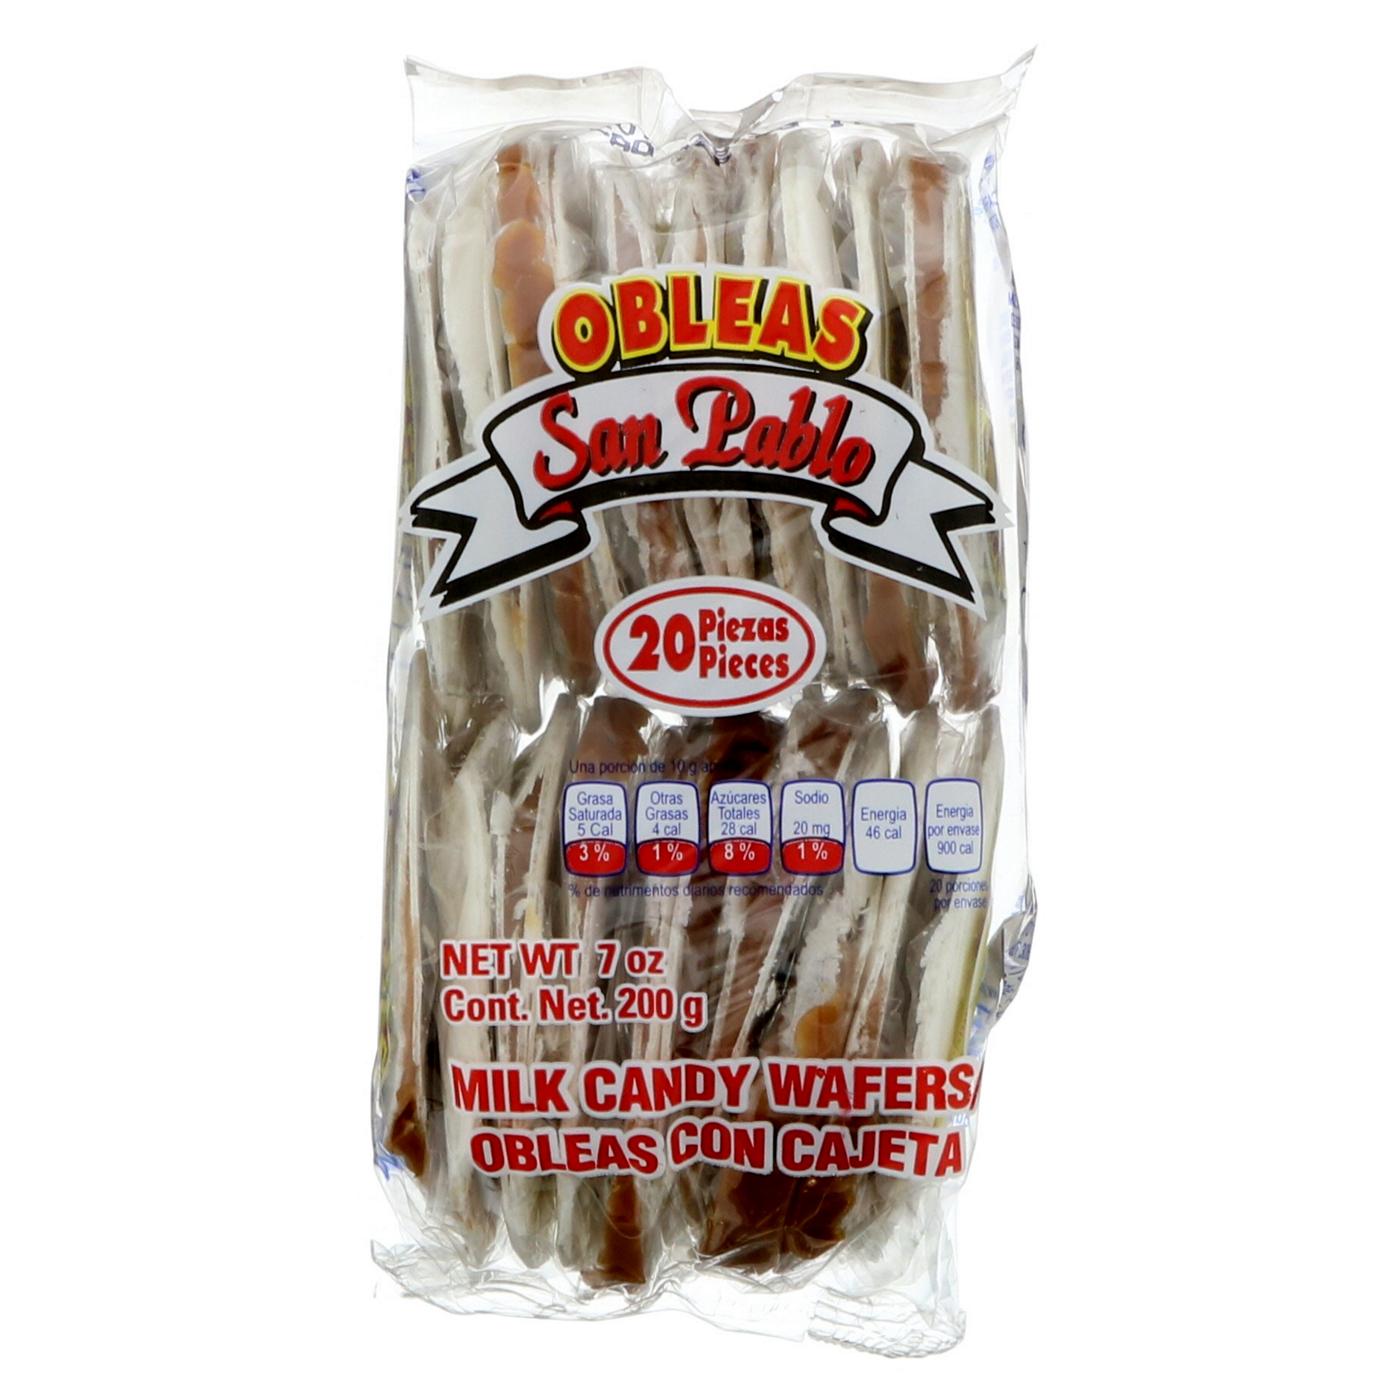 San Pablo Oblea Mini Milk Candy Wafers, Mexican Candy; image 1 of 2